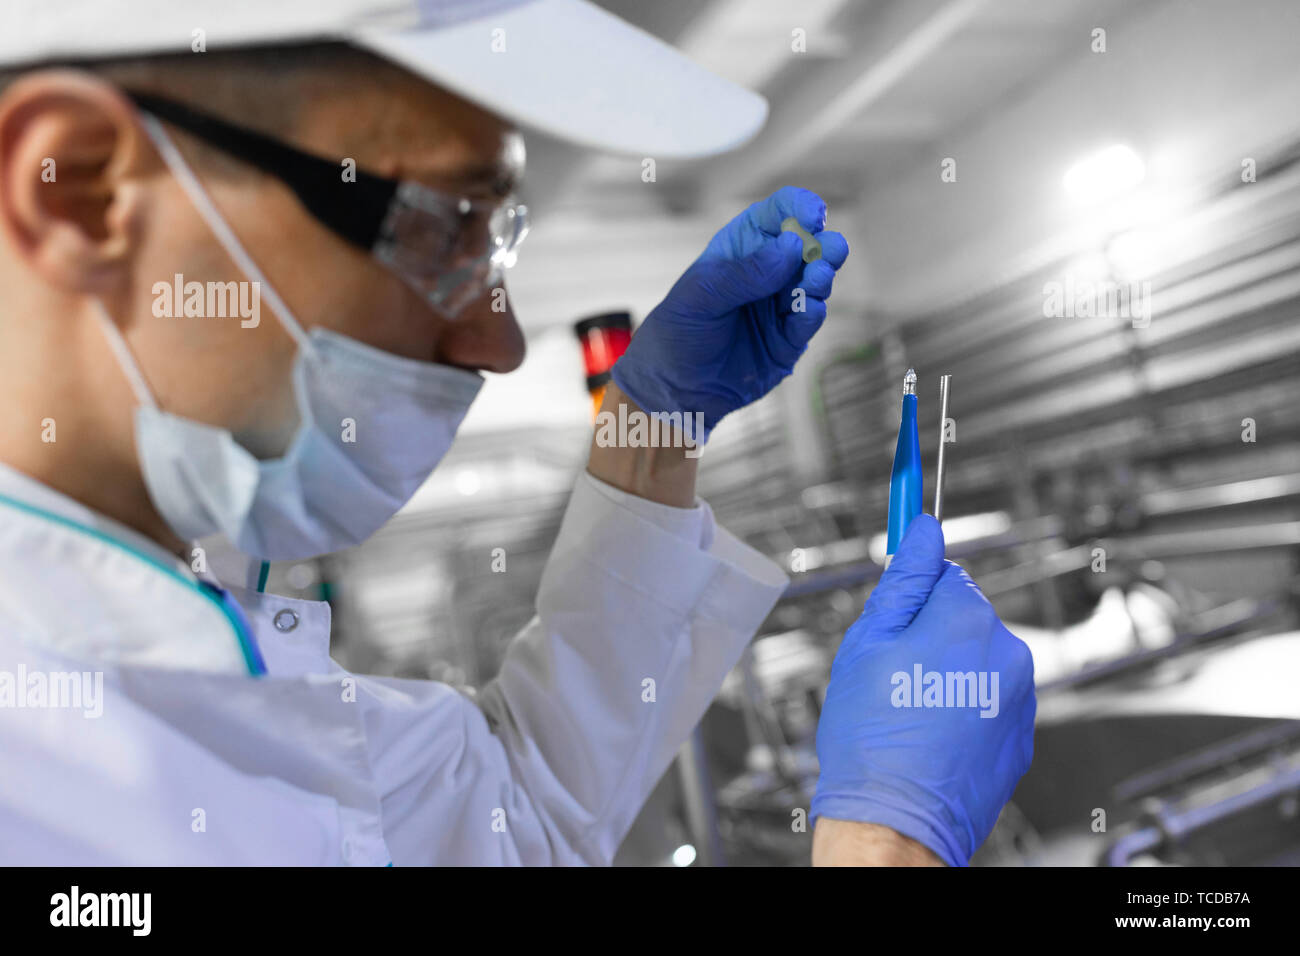 man in a white robe and a cap make an inspection of dairy products Stock Photo